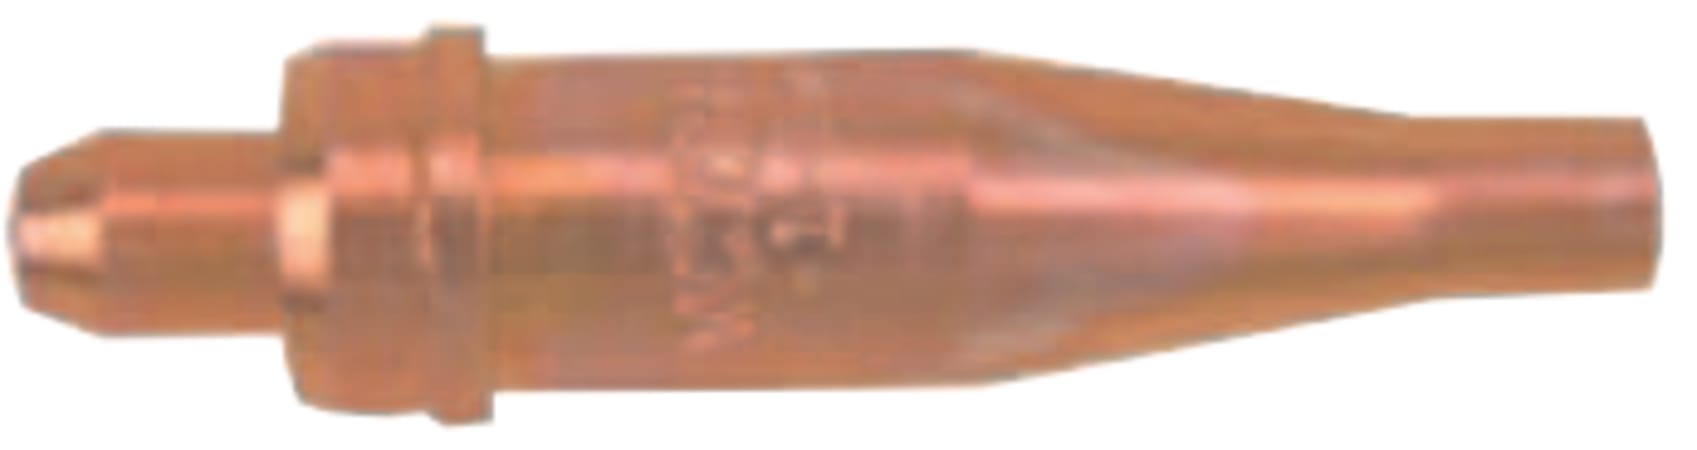 Series 1 Type 101 Cutting Tip, Size 2, Copper